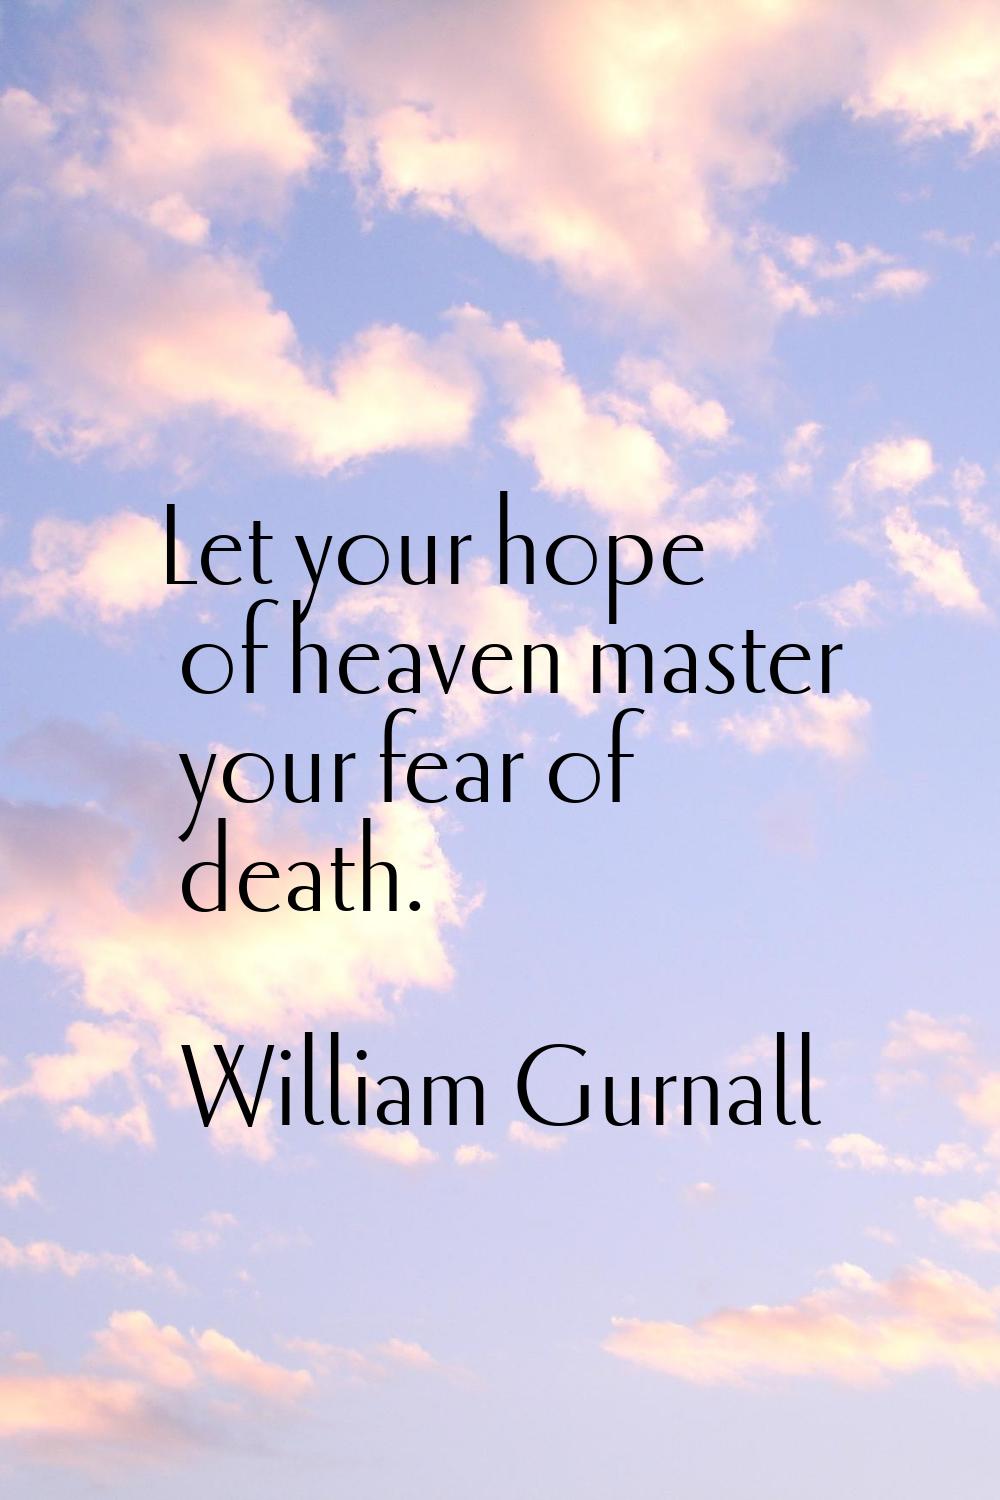 Let your hope of heaven master your fear of death.